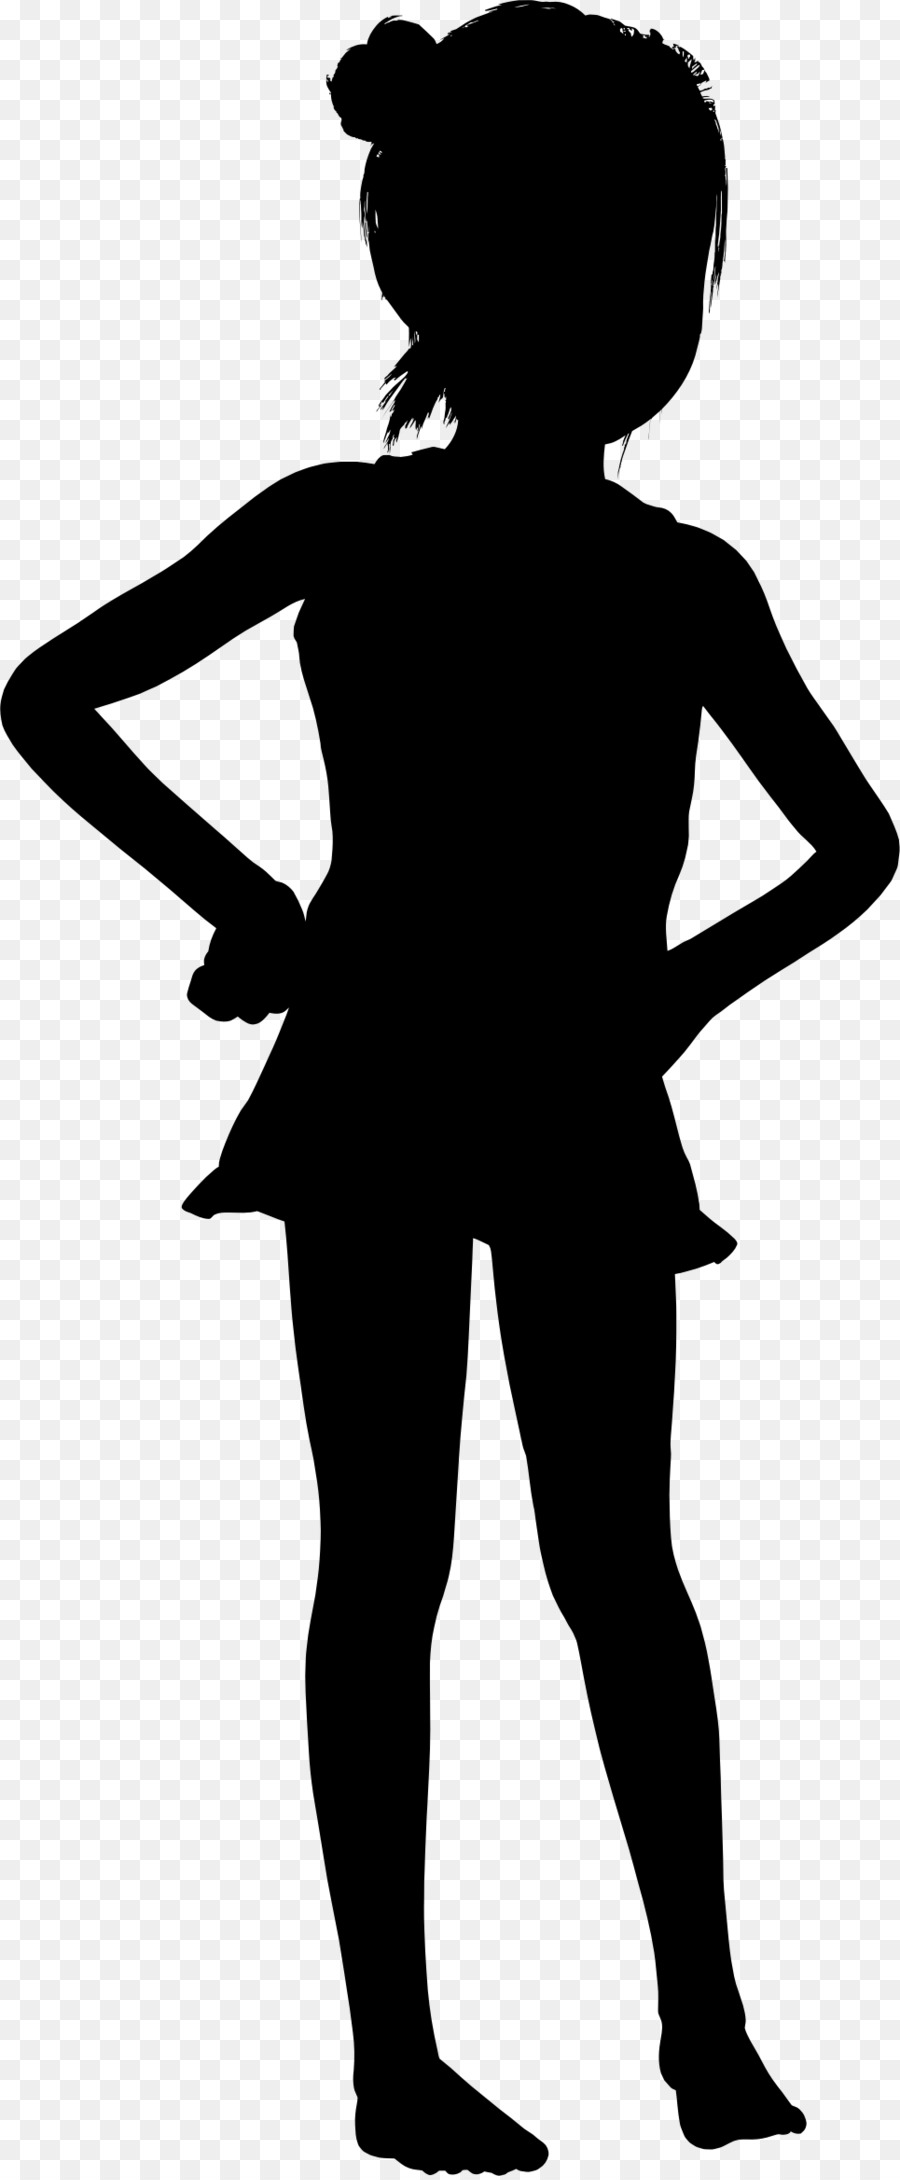 Silhouette Female Child Clip art - Silhouette png download - 965*2333 - Free Transparent  png Download.